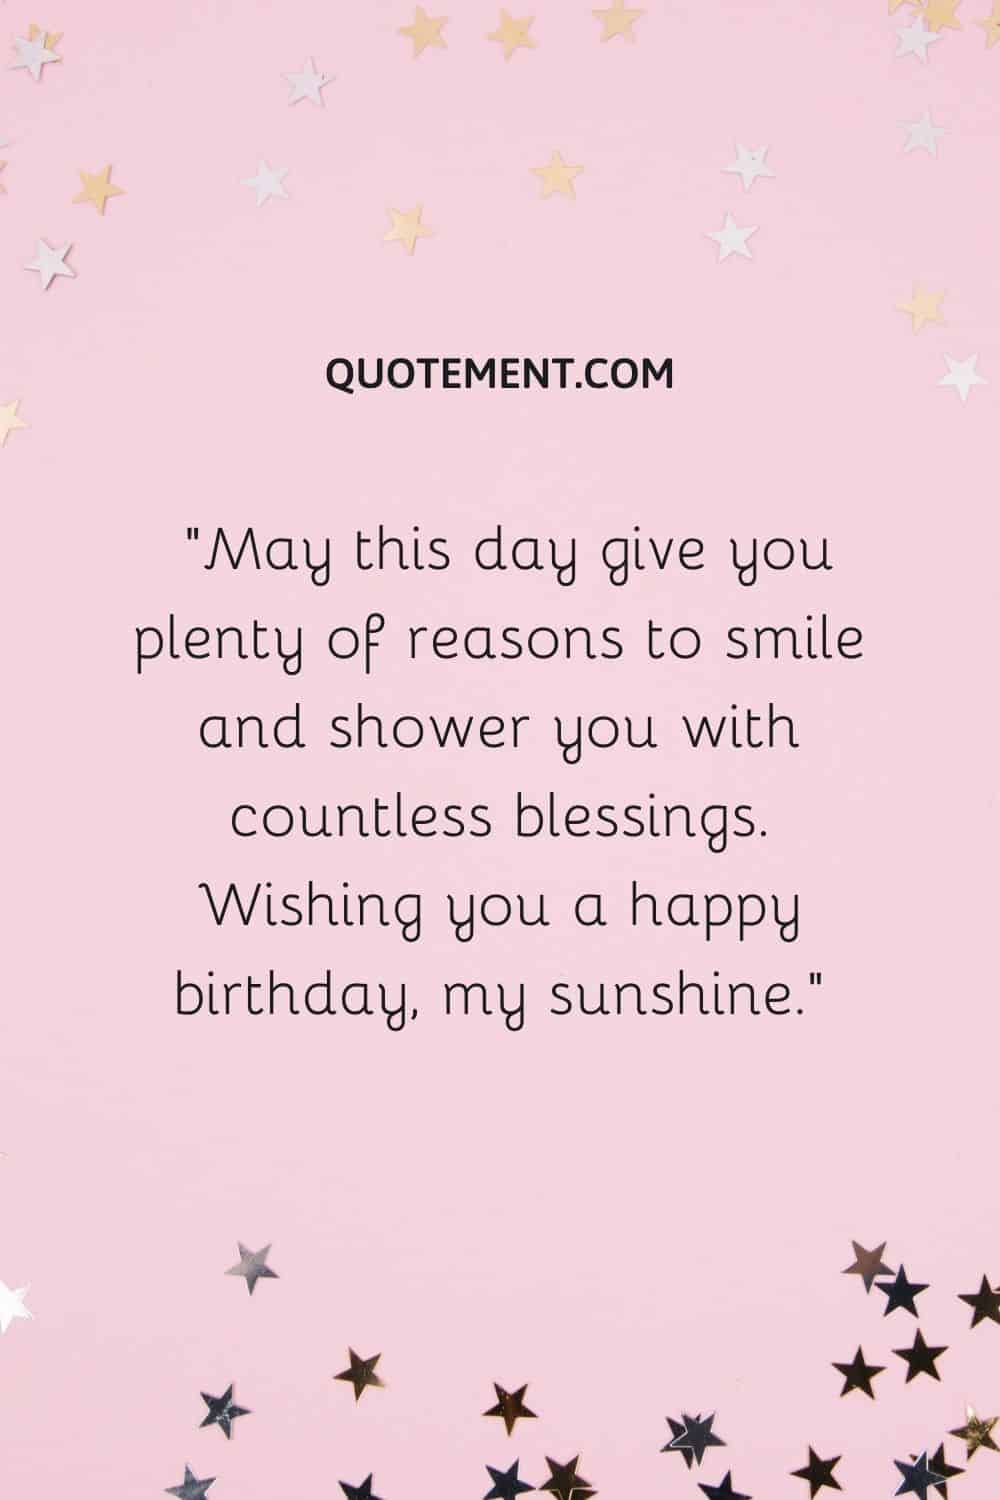 May this day give you plenty of reasons to smile and shower you with countless blessings